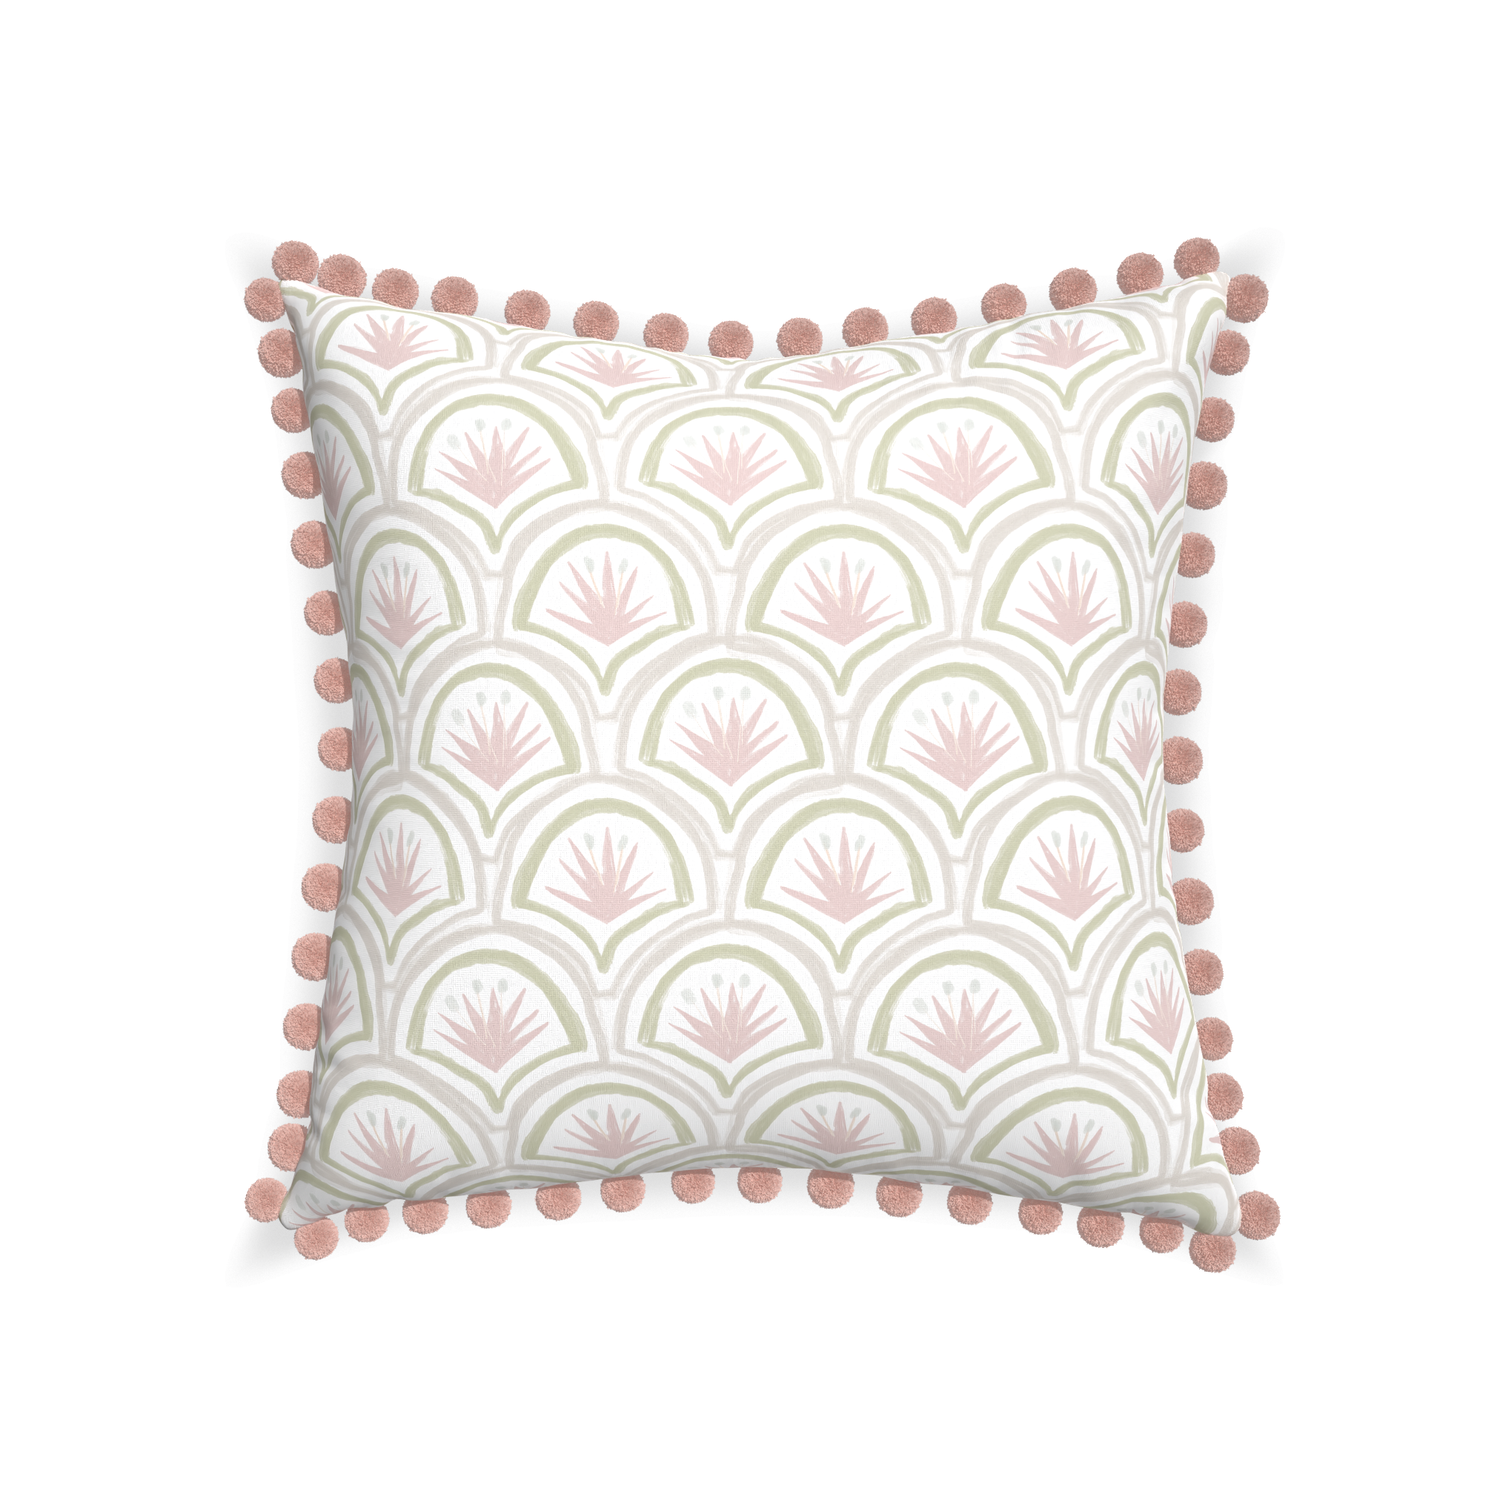 22-square thatcher rose custom pink & green palmpillow with rose pom pom on white background